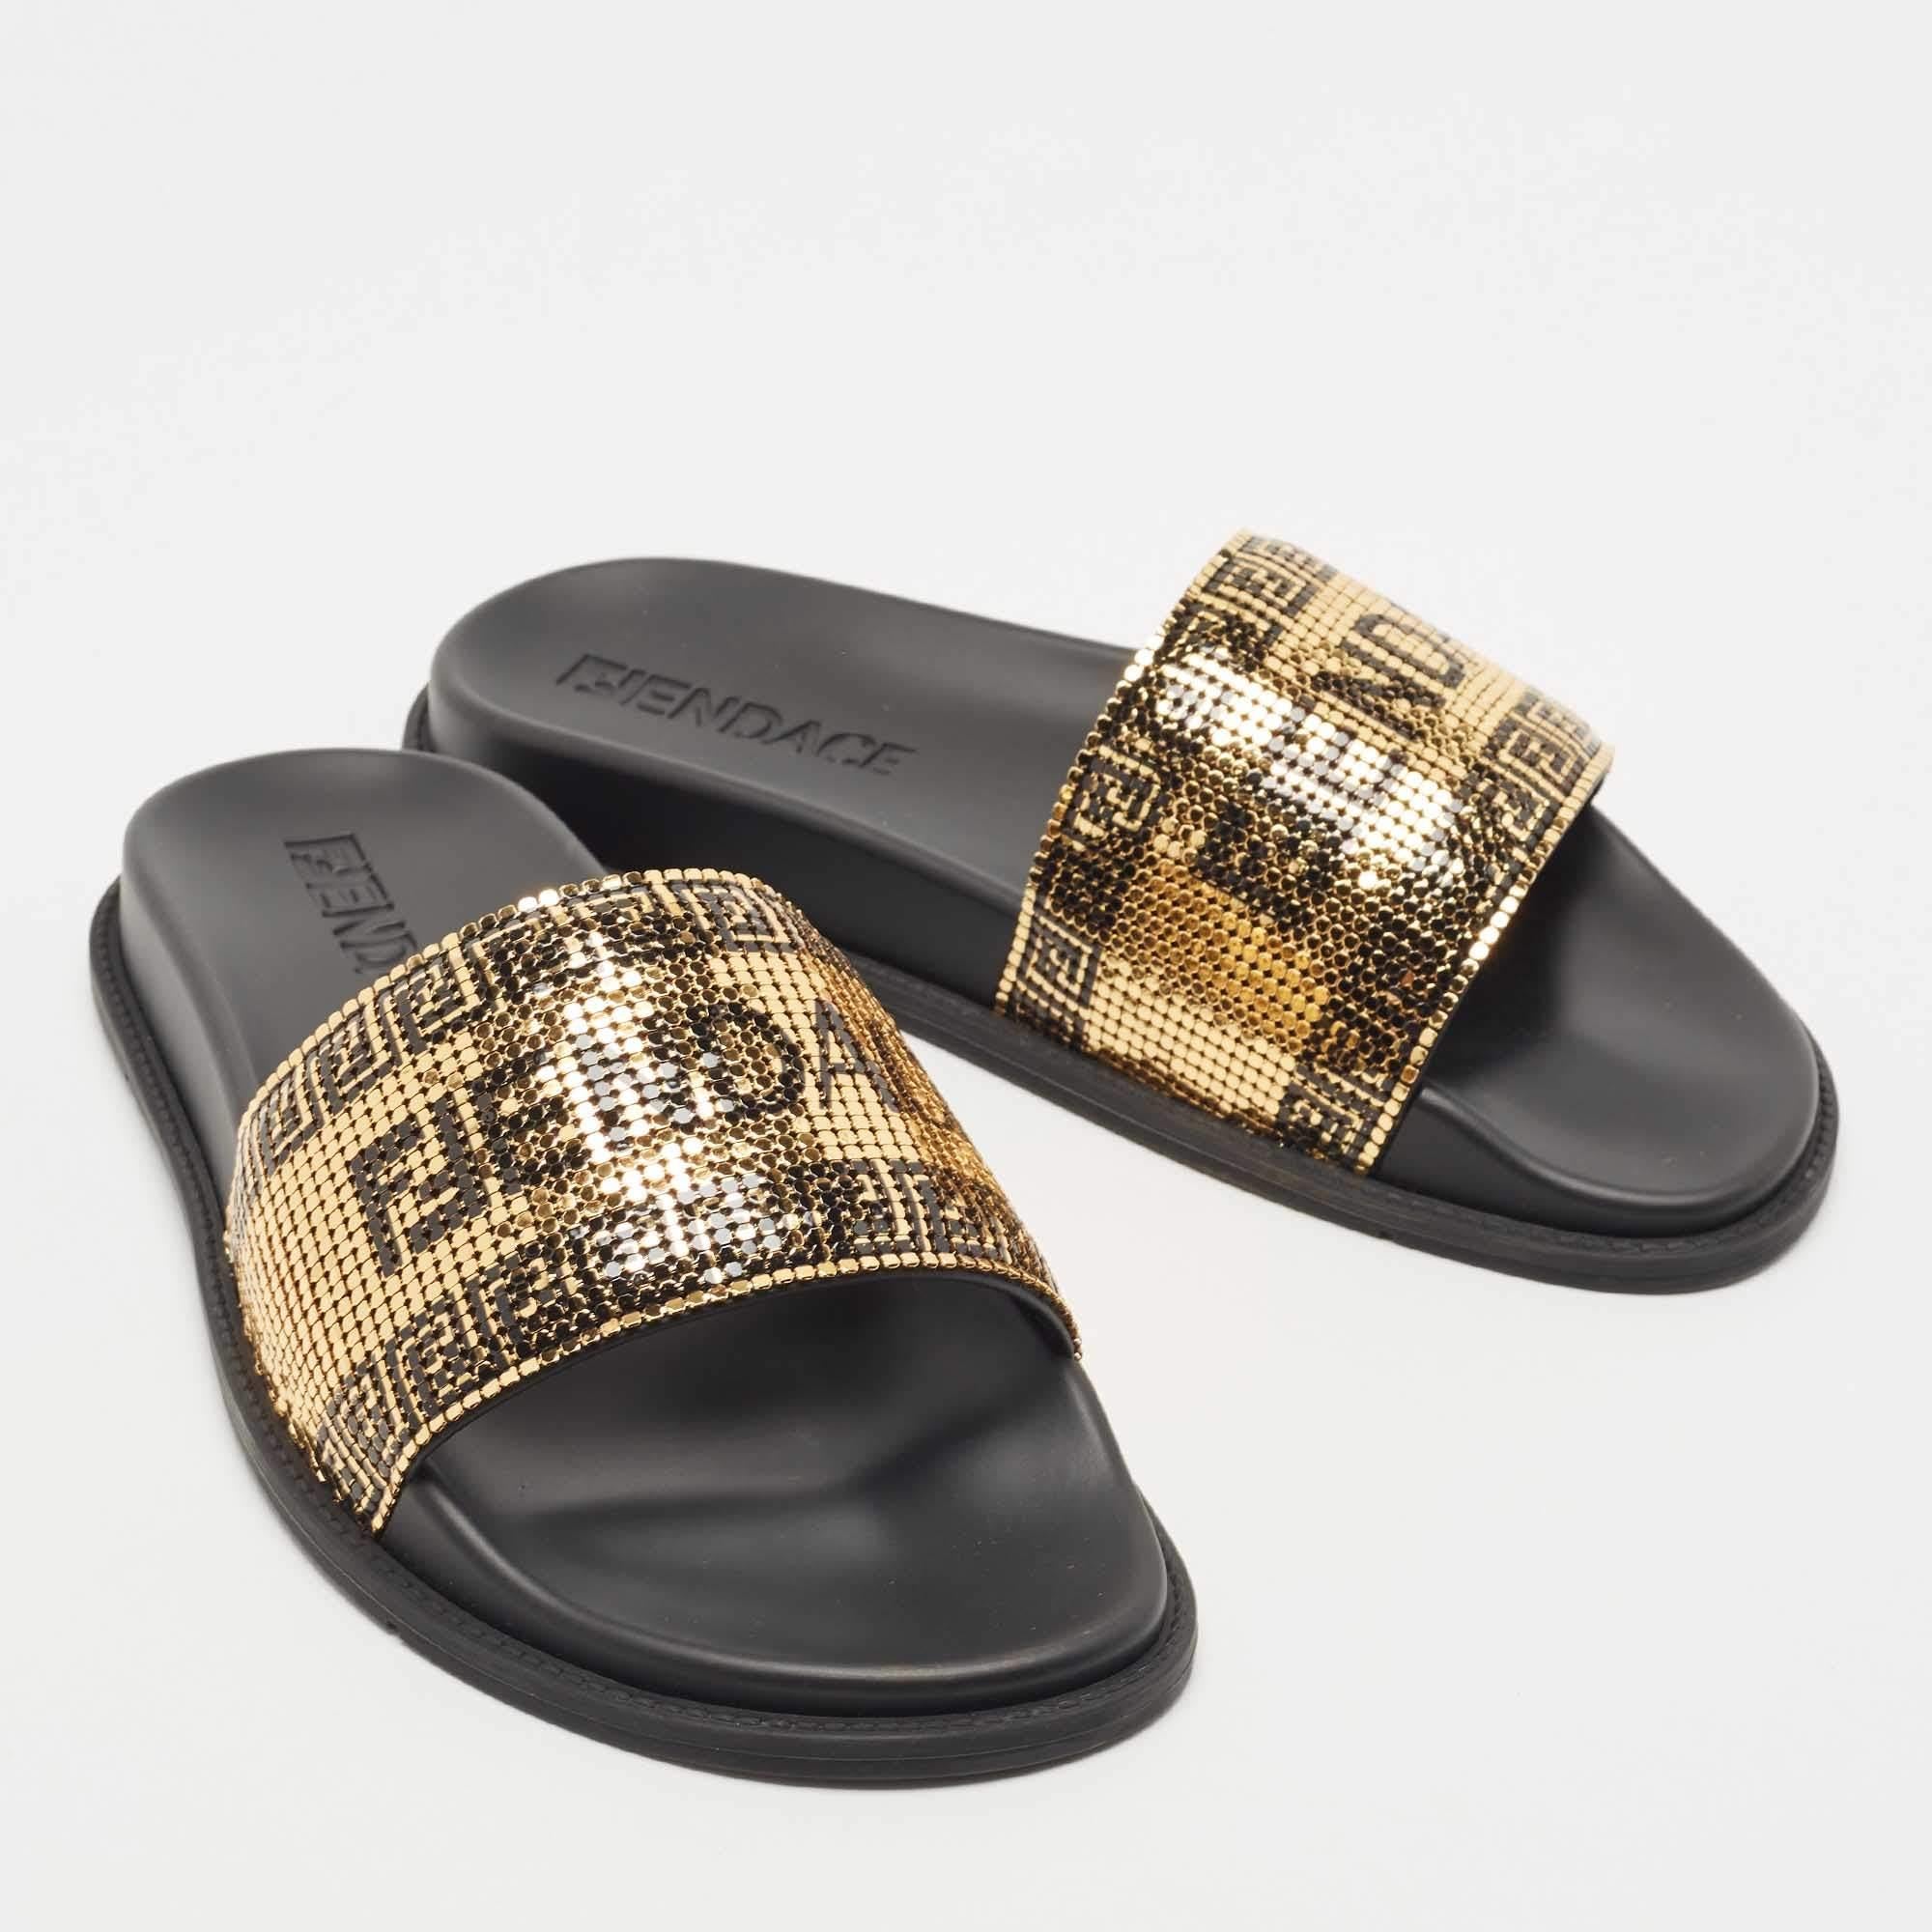 Men's Fendi x Versace Gold Metal and Leather Flat Slides Size 40